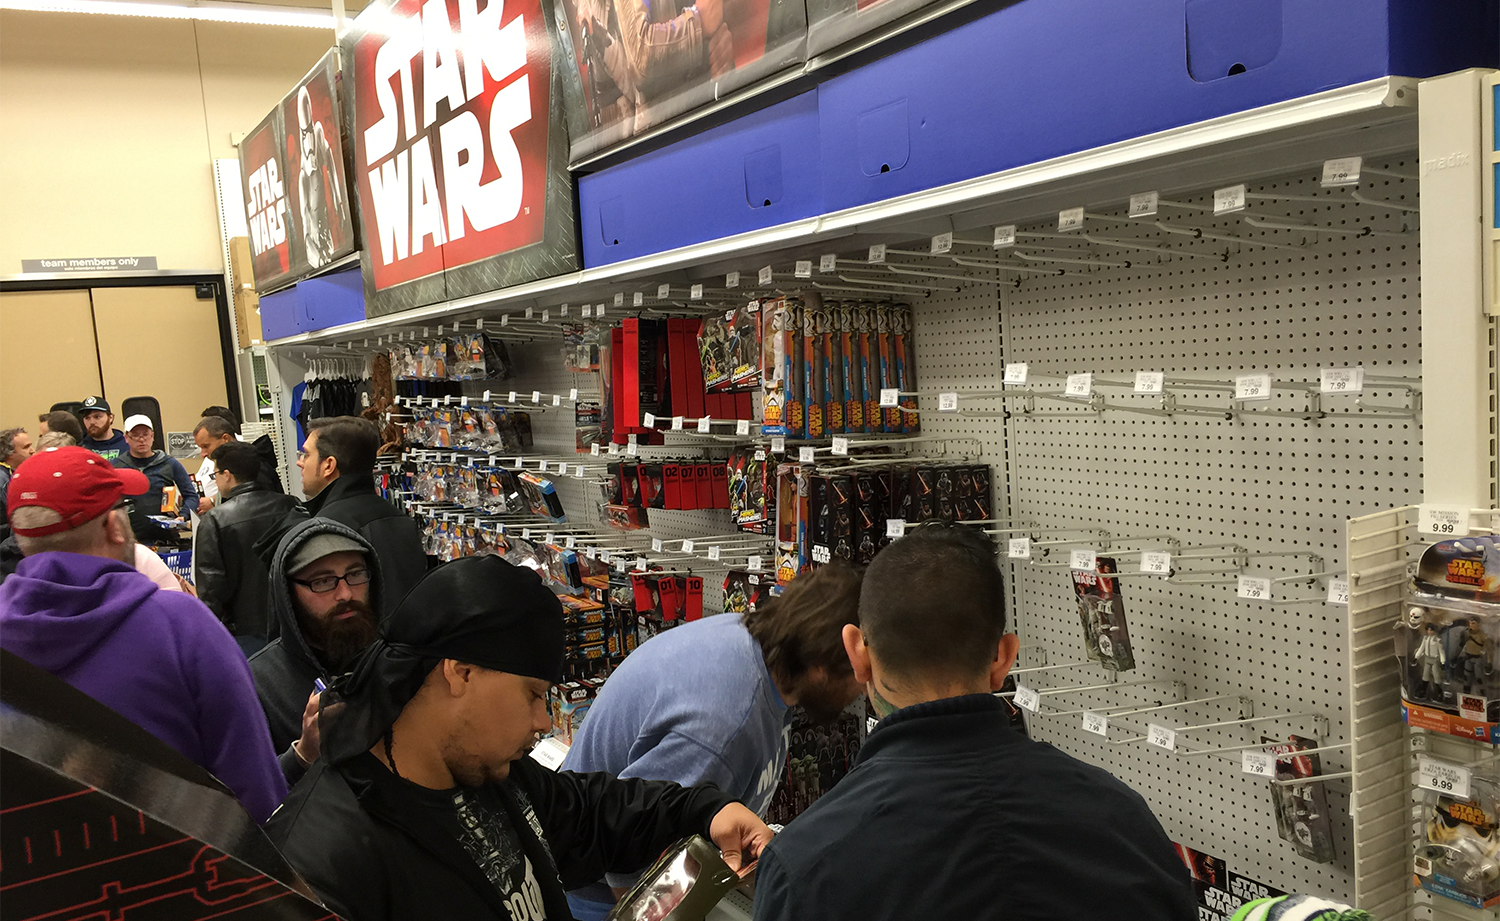 Fans in line for Force Friday at the Toys'R'Us in Tukwila, WA